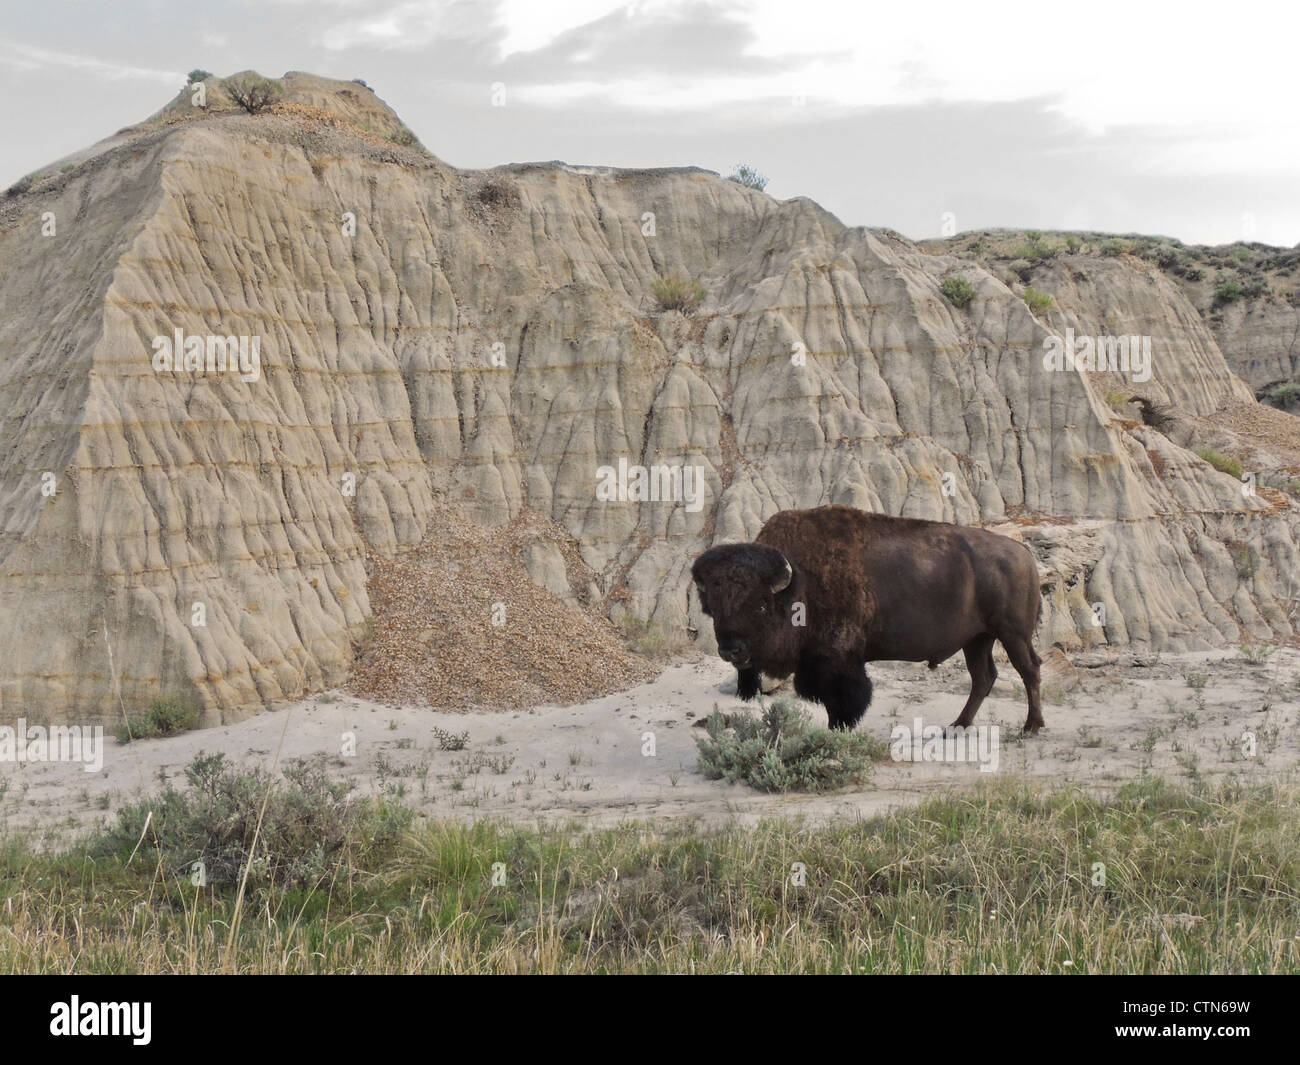 The Badlands of North Dakota are home to a large herd of Bison or American Buffalo, Theodore Roosevelt National Park N. Dakota. Stock Photo